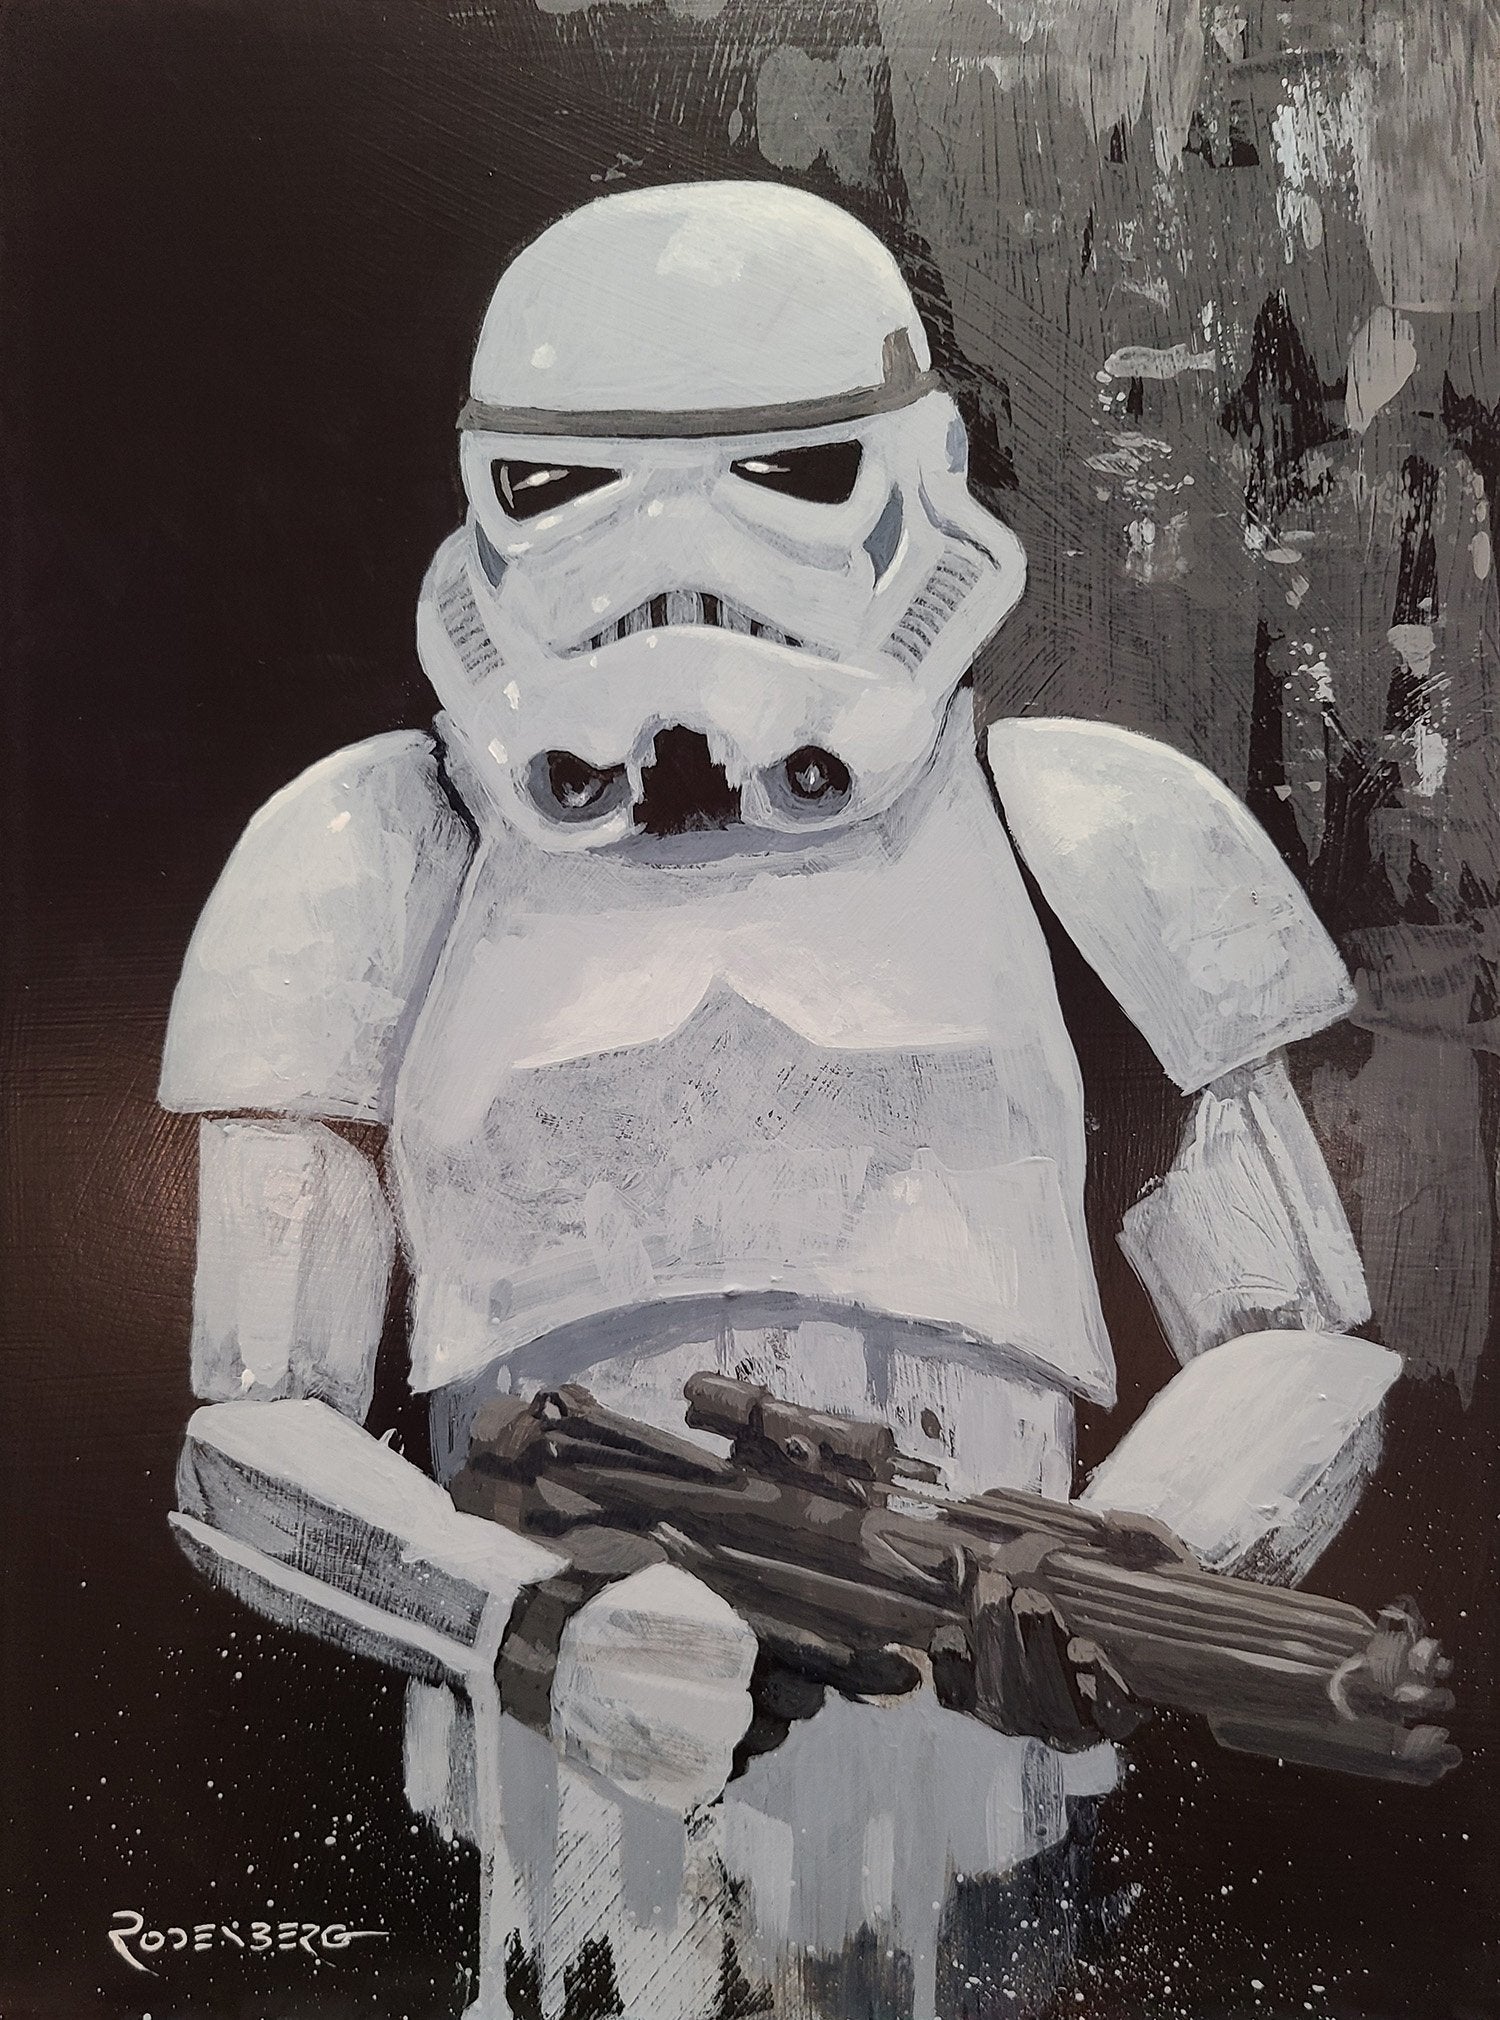 Star Wars Stormtrooper painting art by Jeff Rodenberg